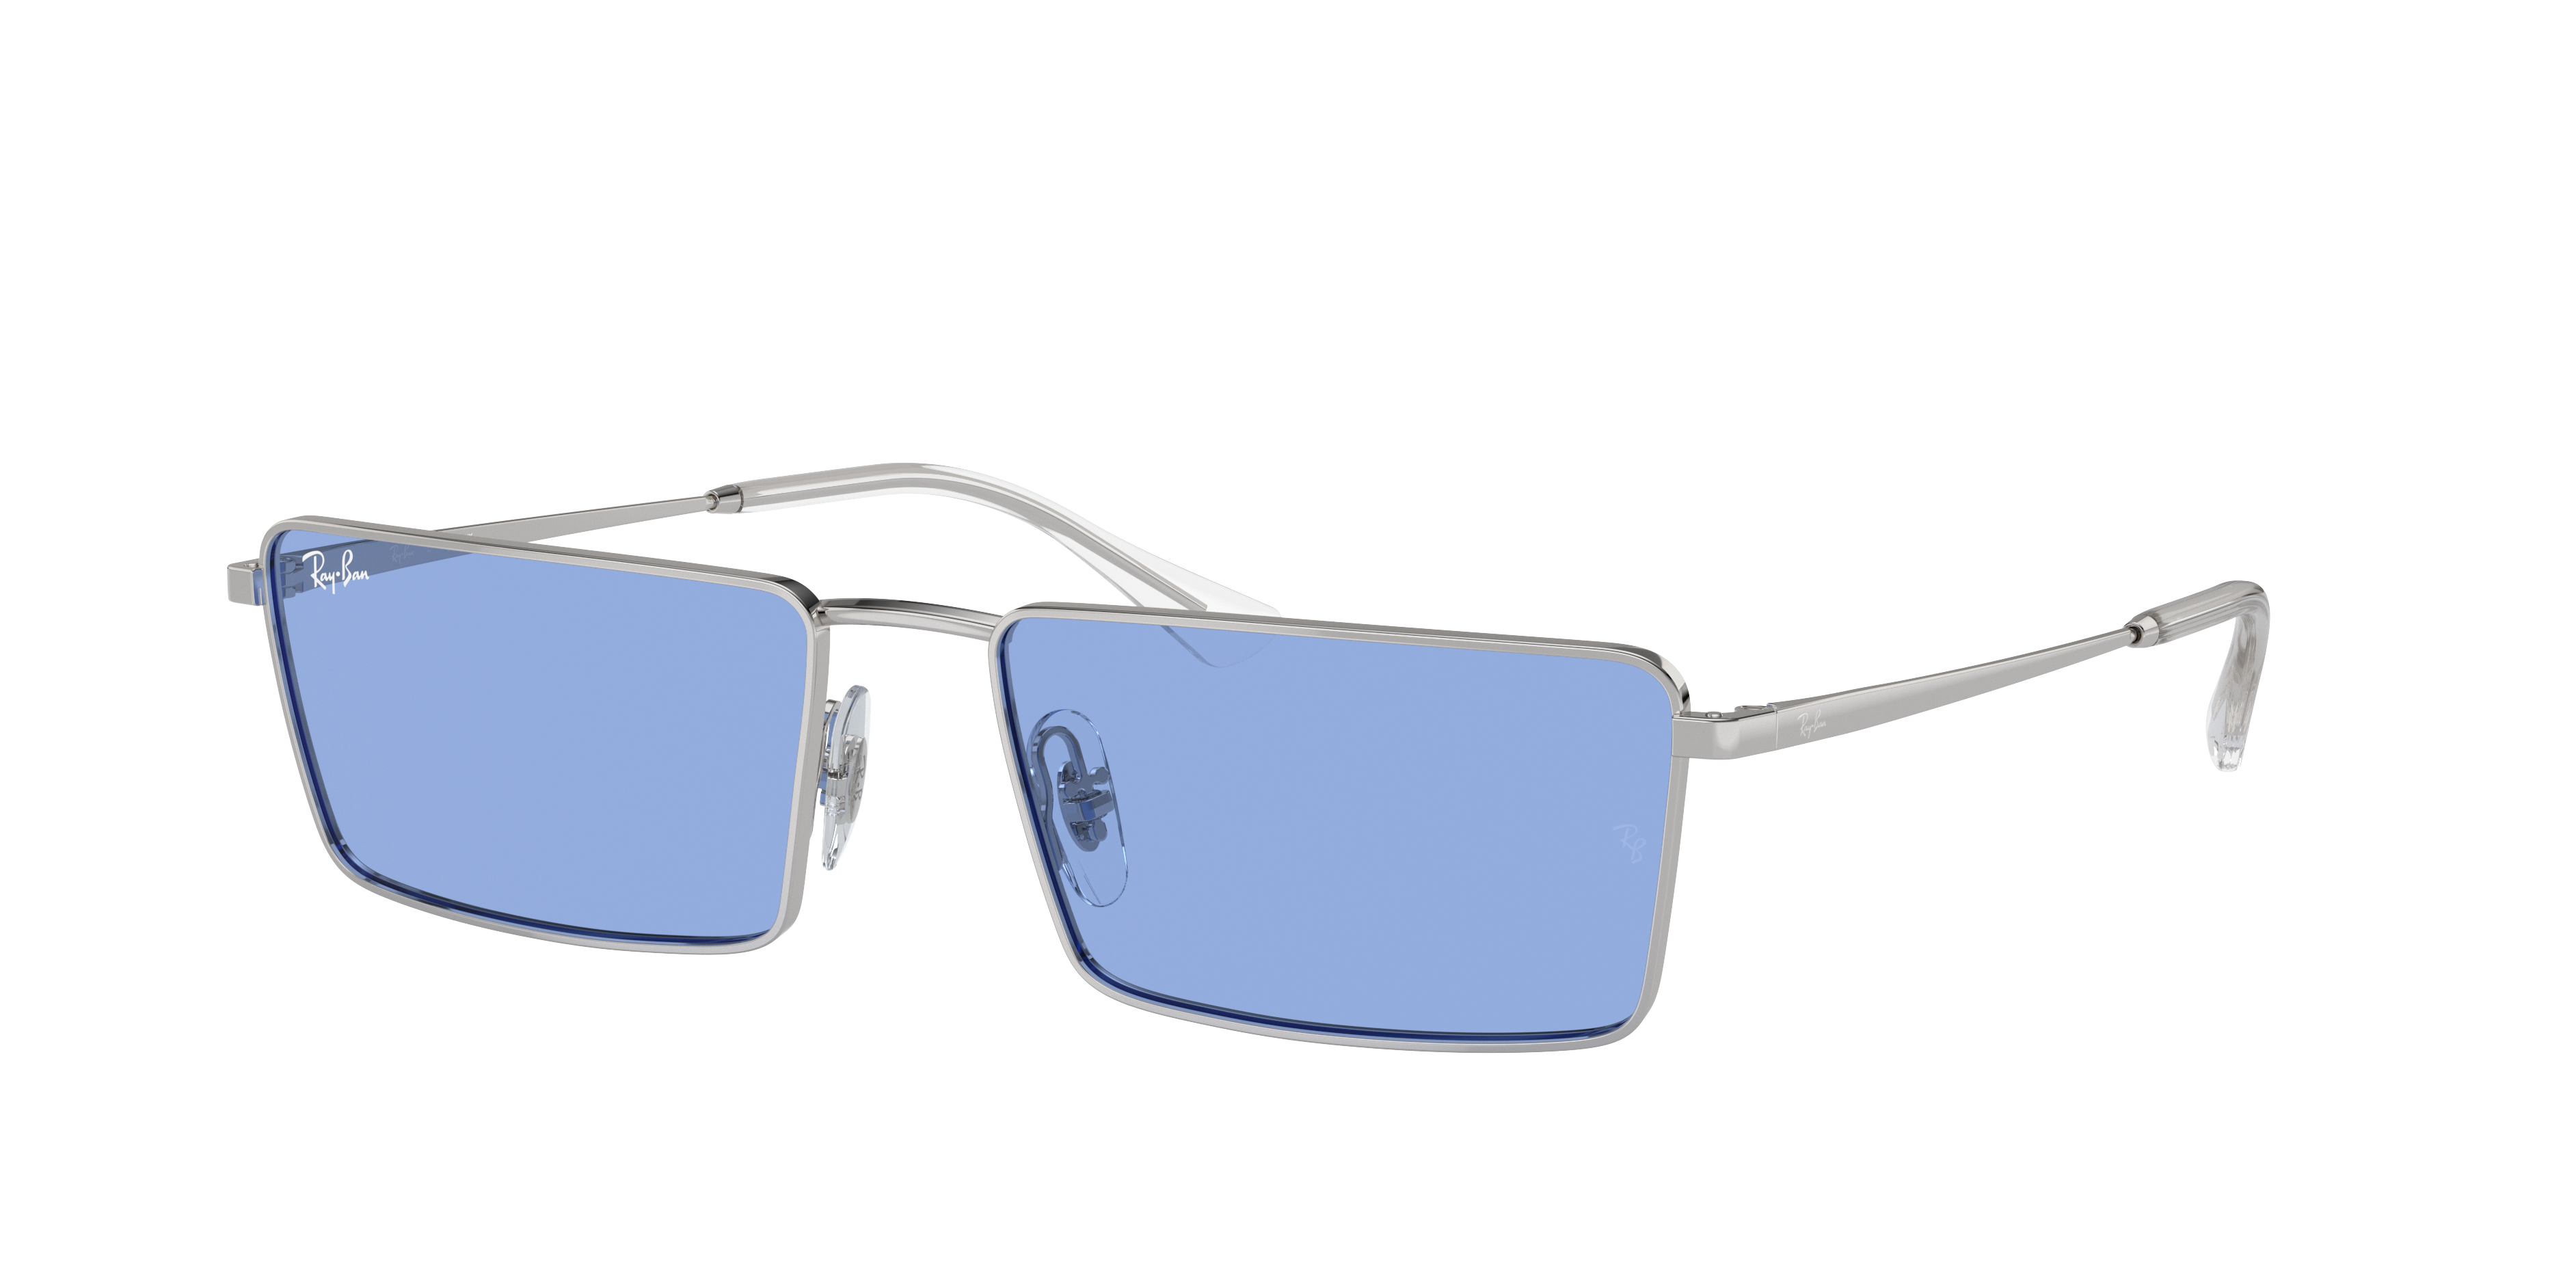 DADDY-O II BLUE-LIGHT CLEAR - Everglasses - RB2016